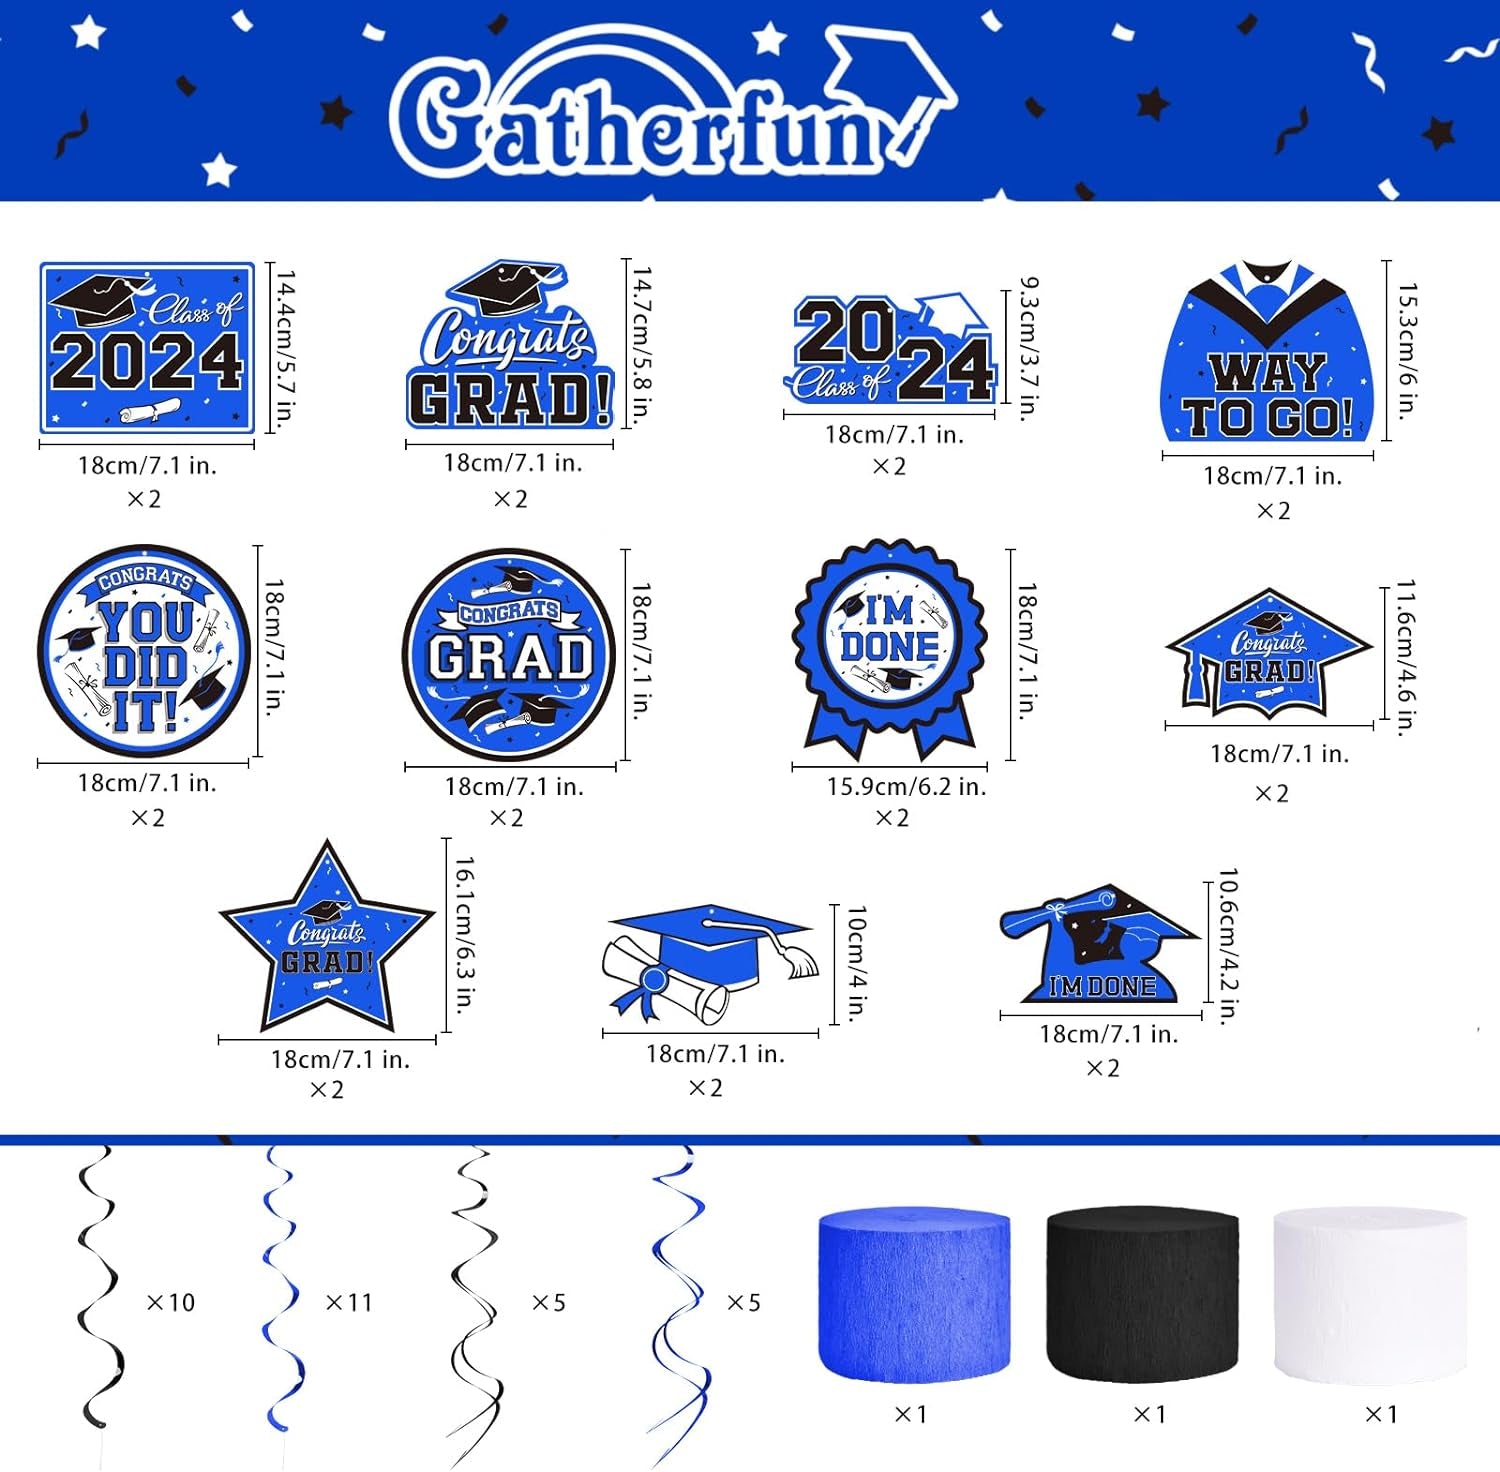 Blue Themed 2024 Graduation Decorations Set - Congrats Grad Banner, Class of 2024 Backdrop, Balloons & Streamers Kit - Complete Party Supplies for High School & College Celebrations